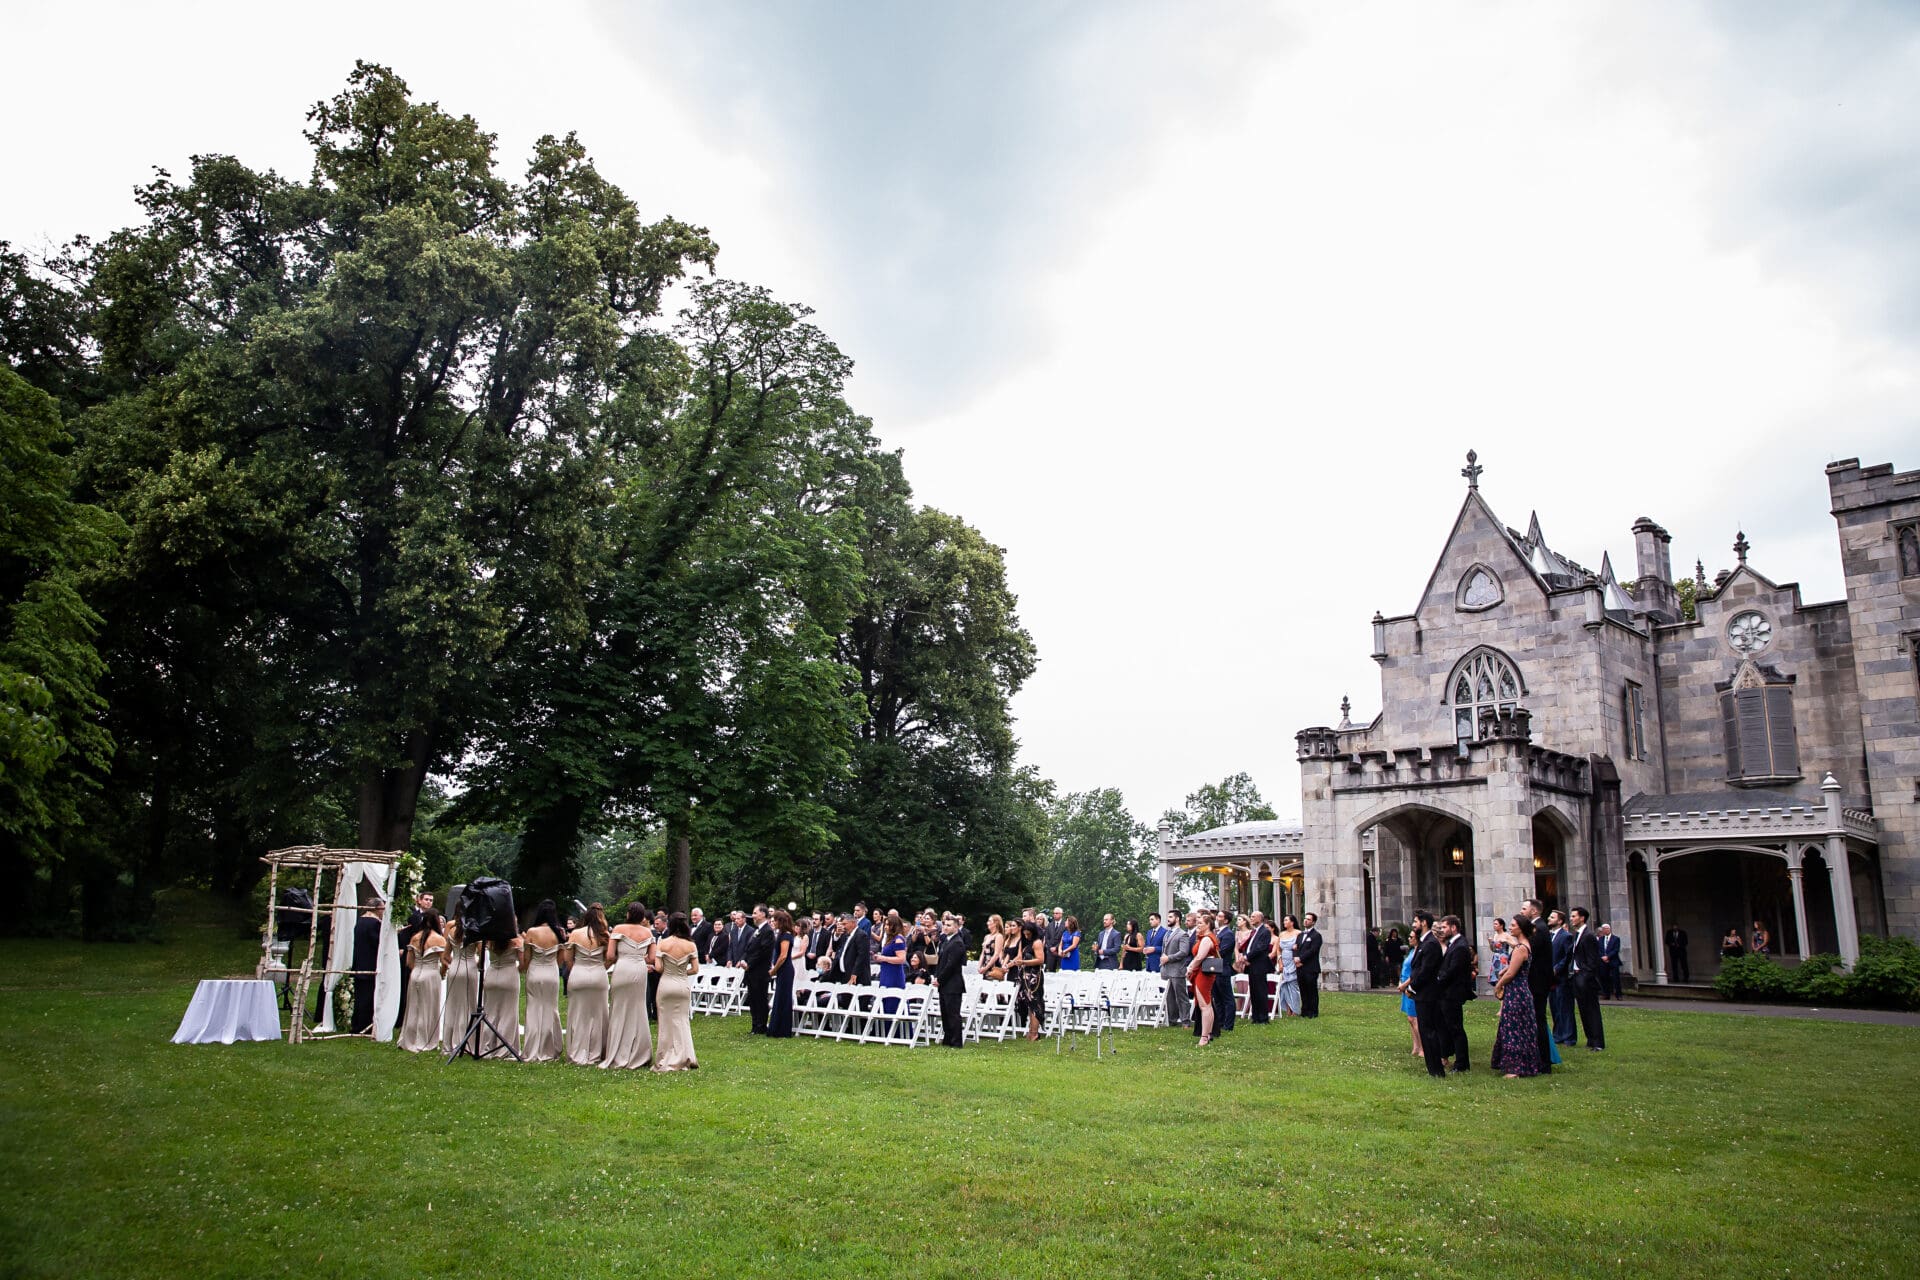 An outdoor wedding ceremony taking place on the grounds of Lyndhurst Castle in Tarrytown New York